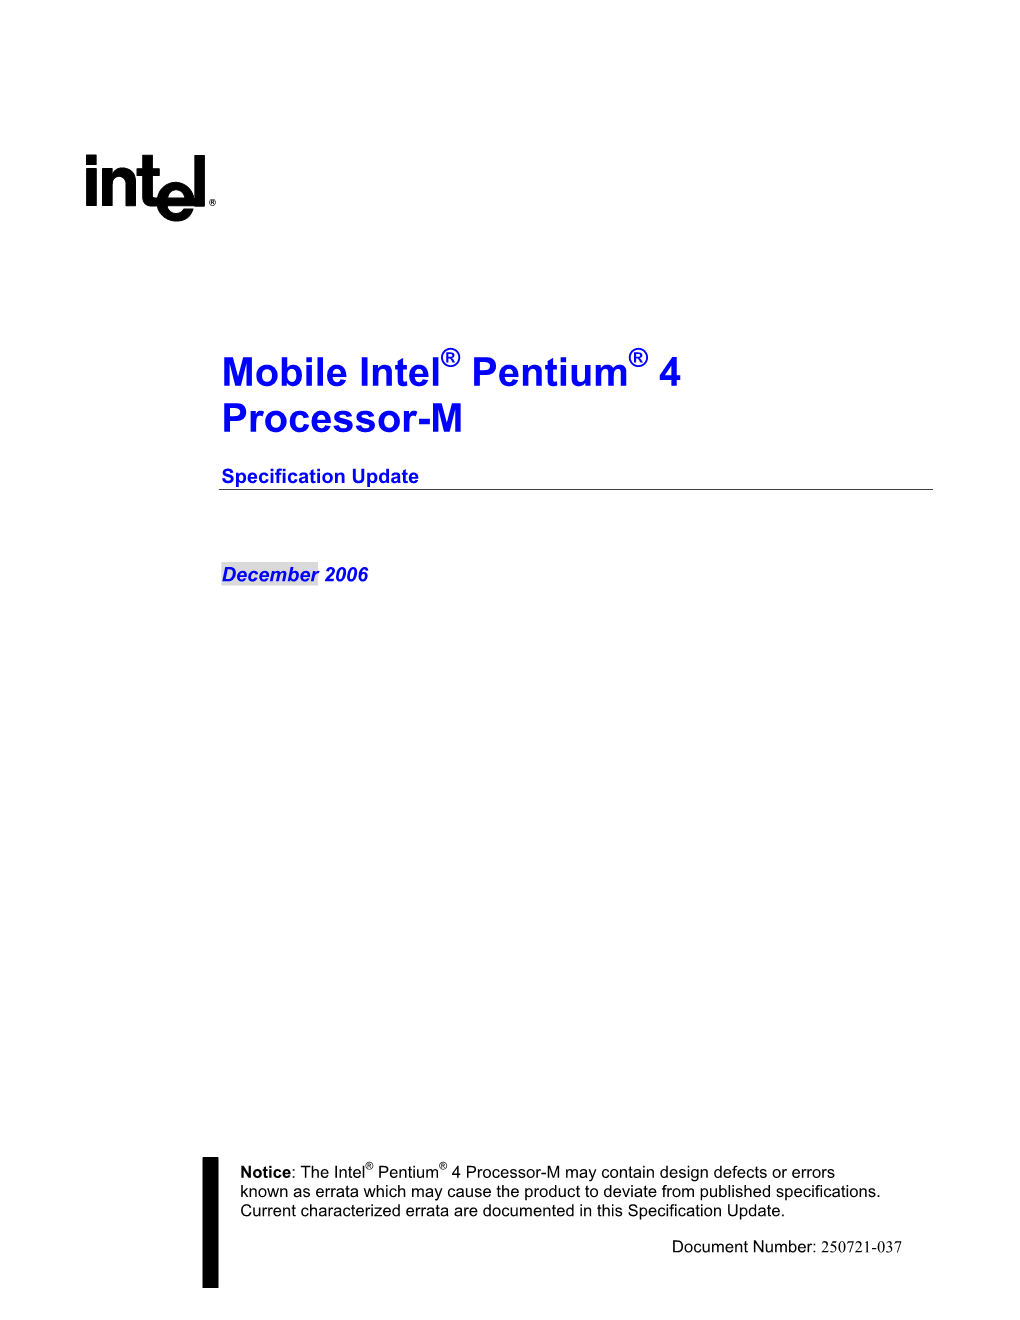 Mobile Intel Pentium 4 Processor-M’S Behavior to Deviate from Published Specifications